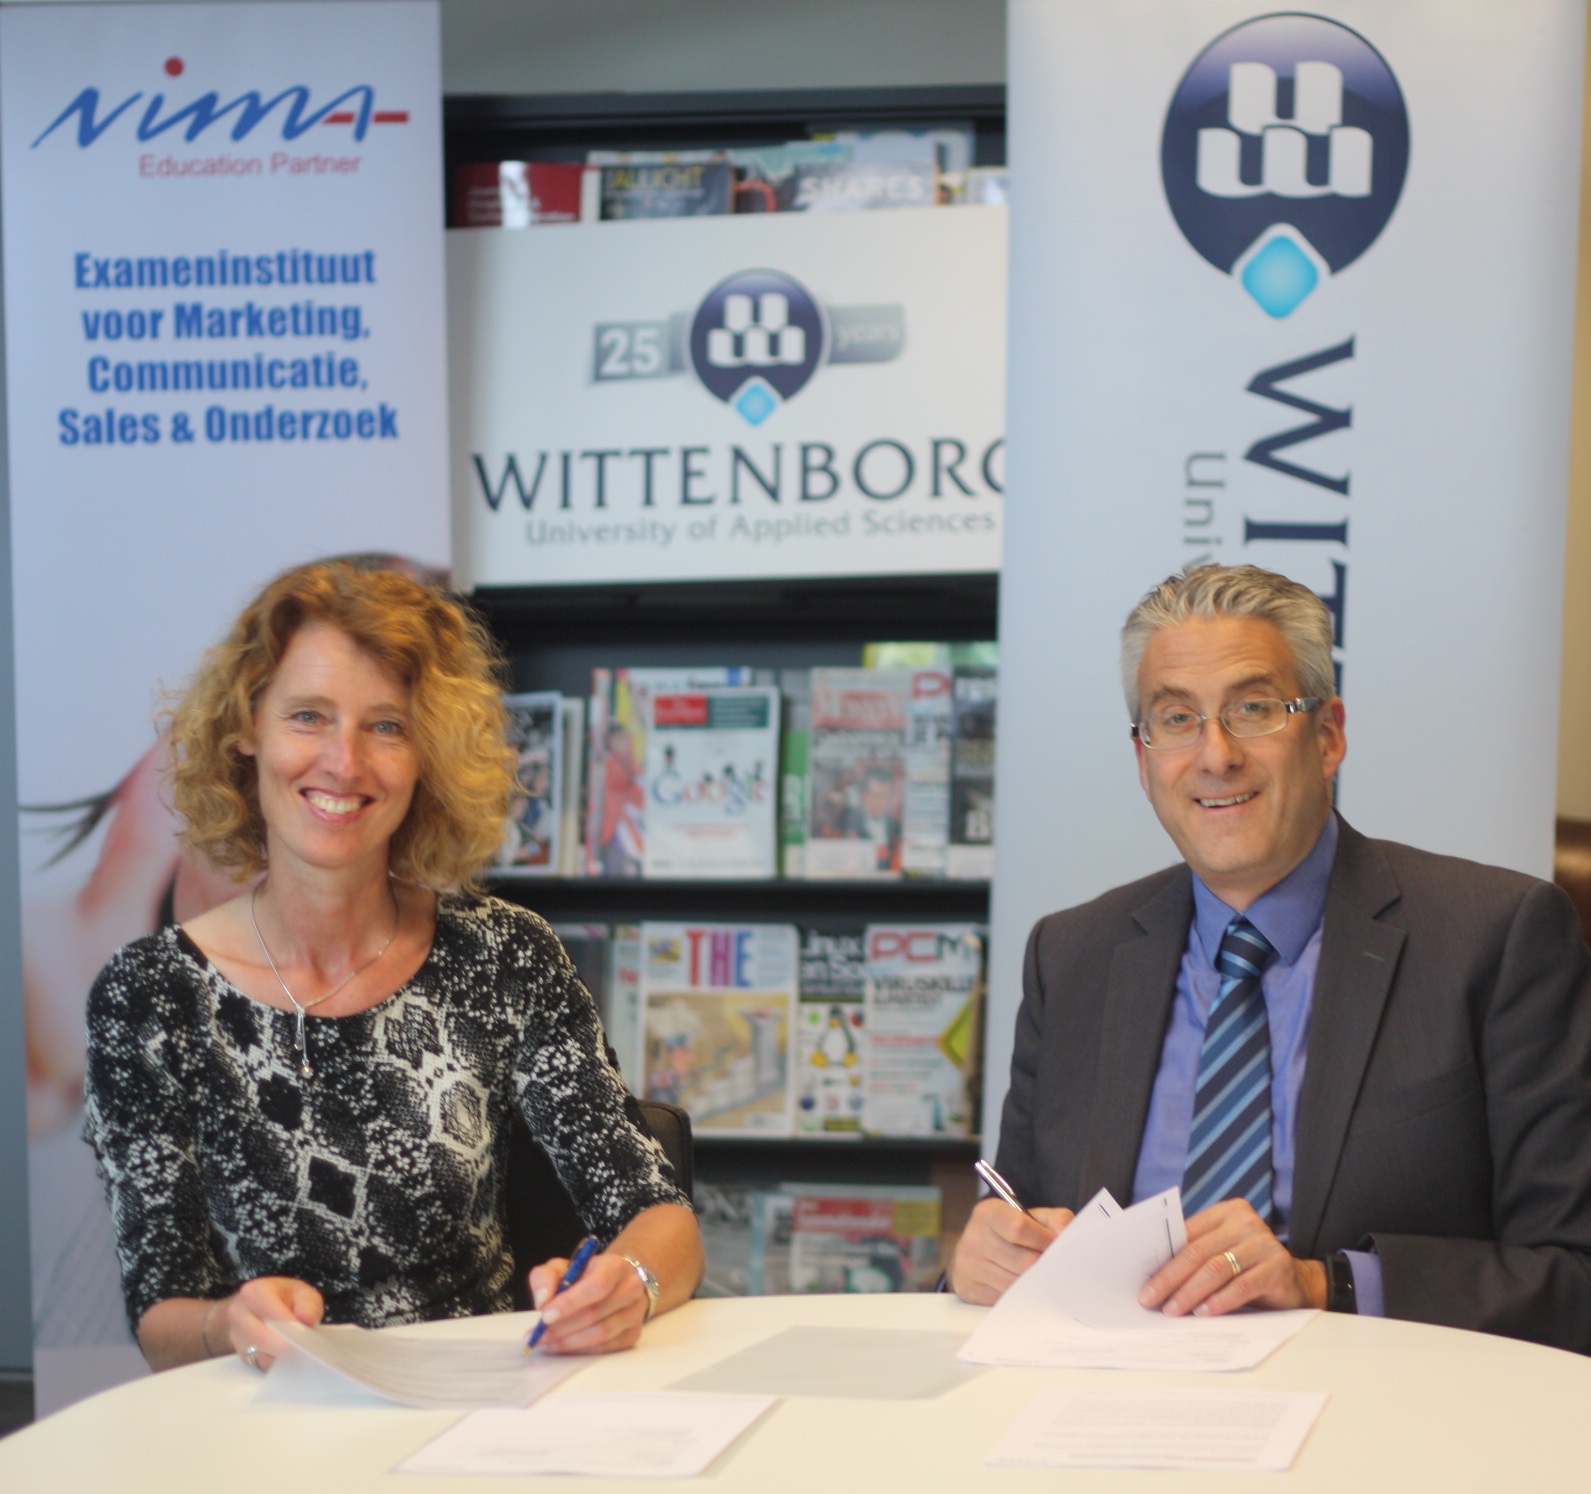 WUAS has signed a contract with the Netherlands Institute for Marketing (NIMA) to offer a fast tracked NIMA B1 and 2 course from September 2015. NIMA is the Dutch authoritative body and exam institute in the field of marketing